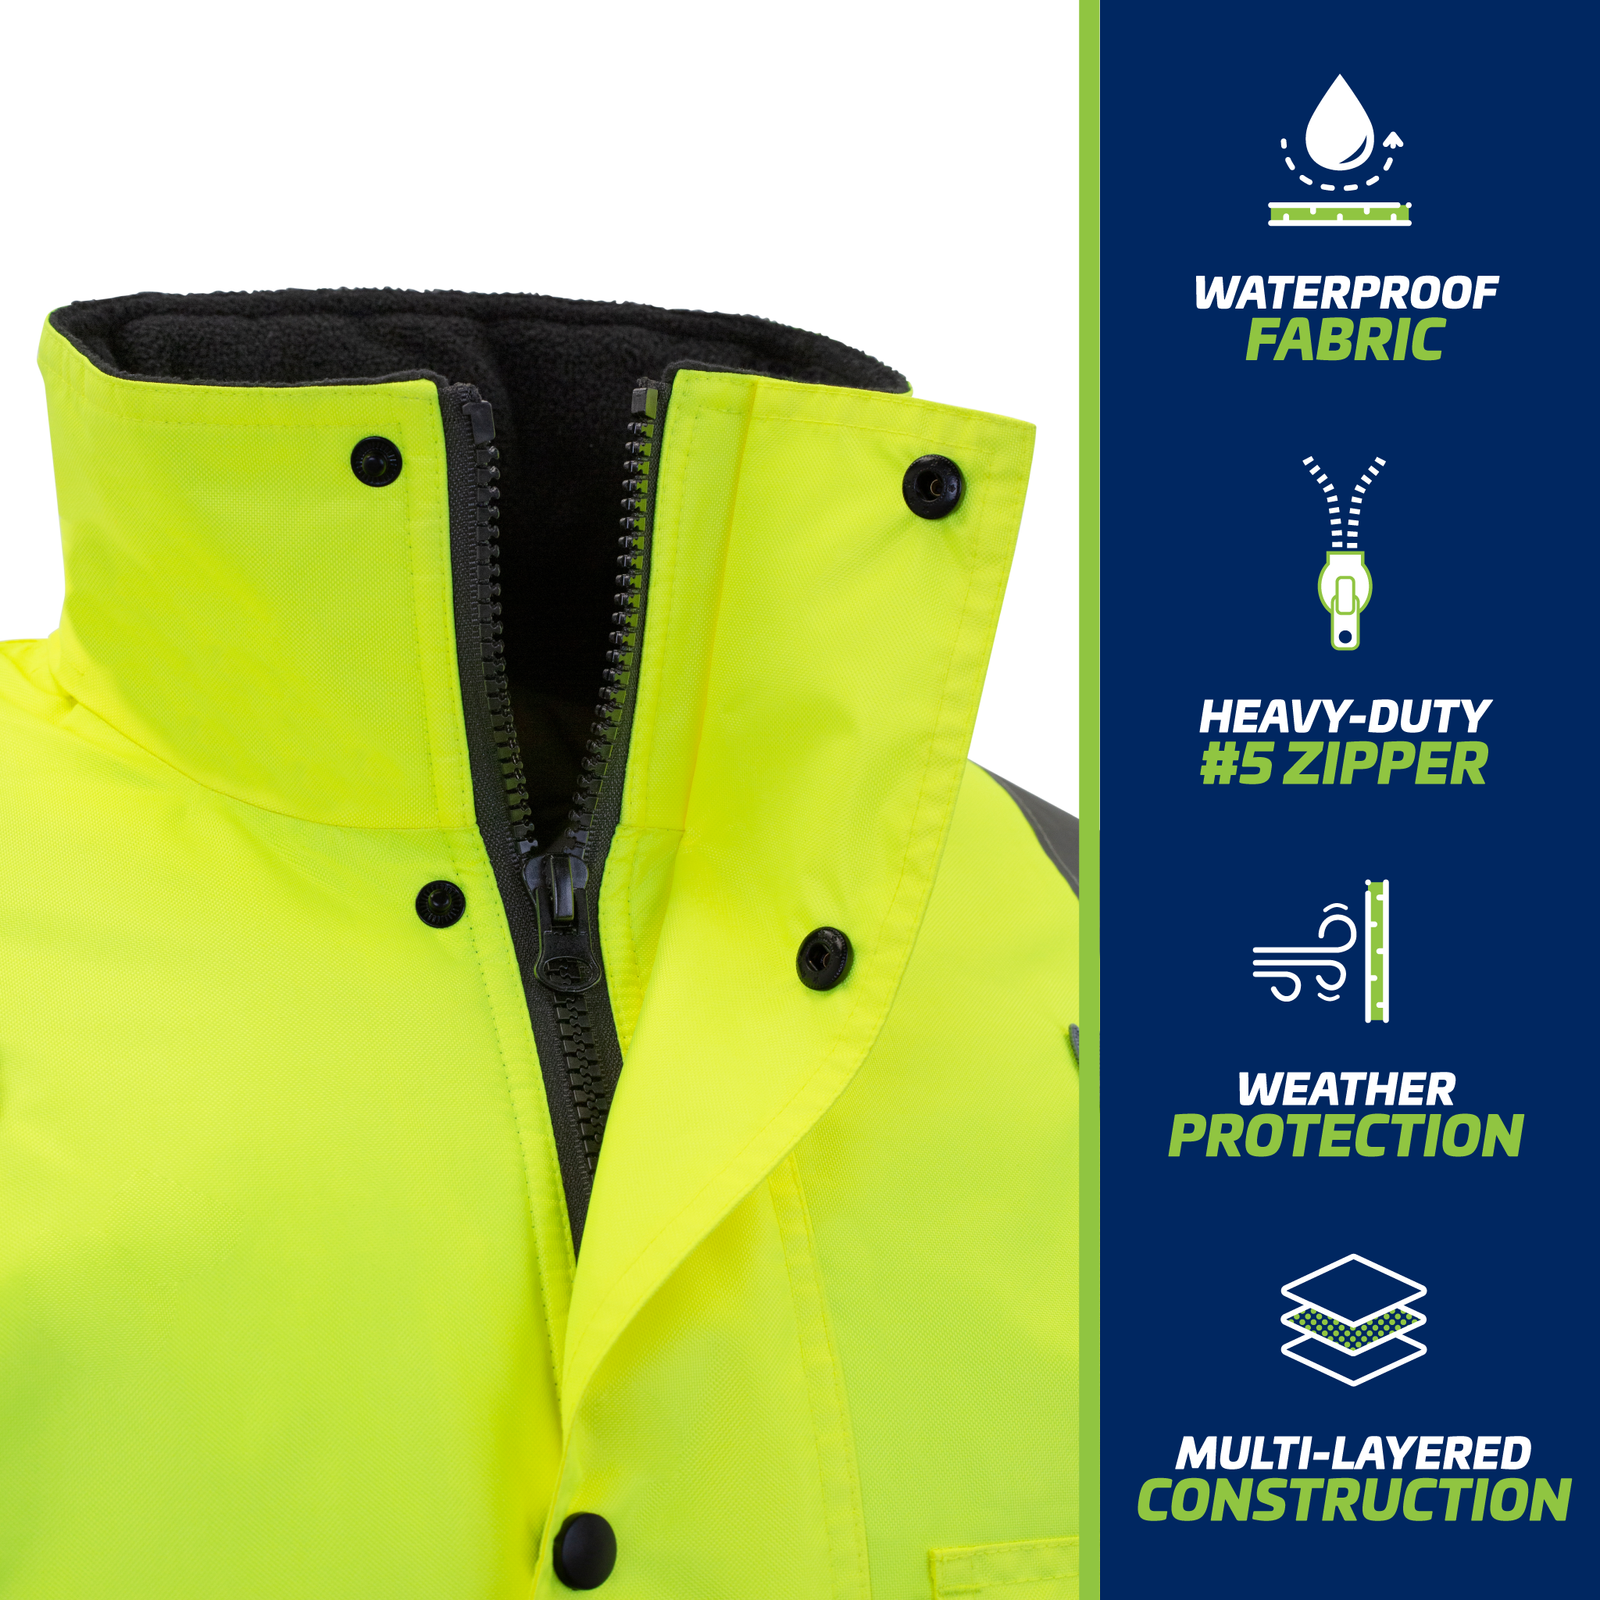 Icons with text show hi vis safety parka jacket with heavy duty zipper, waterproof fabric, fleece neck liner, flap with buttons to cover zipper, and multilayer construction for weather protection